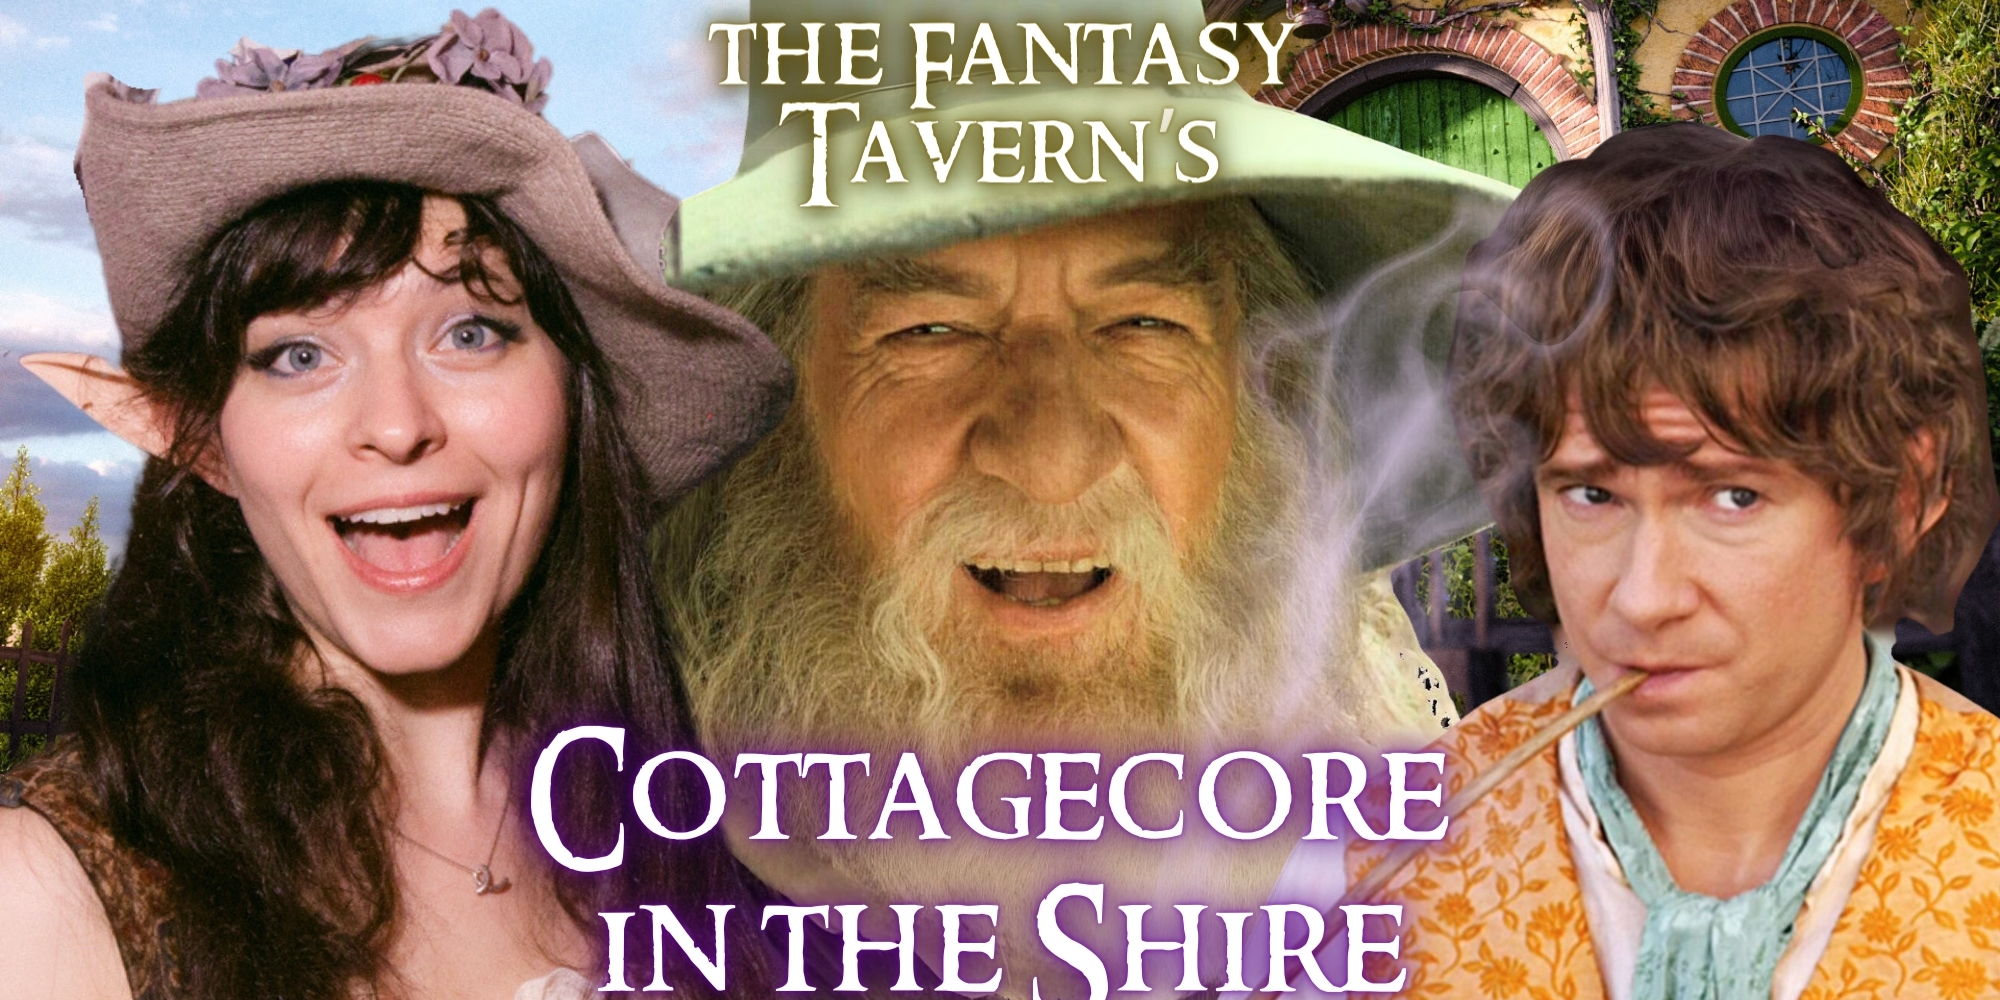 THE FANTASY TAVERN: COTTAGECORE IN THE SHIRE promotional image